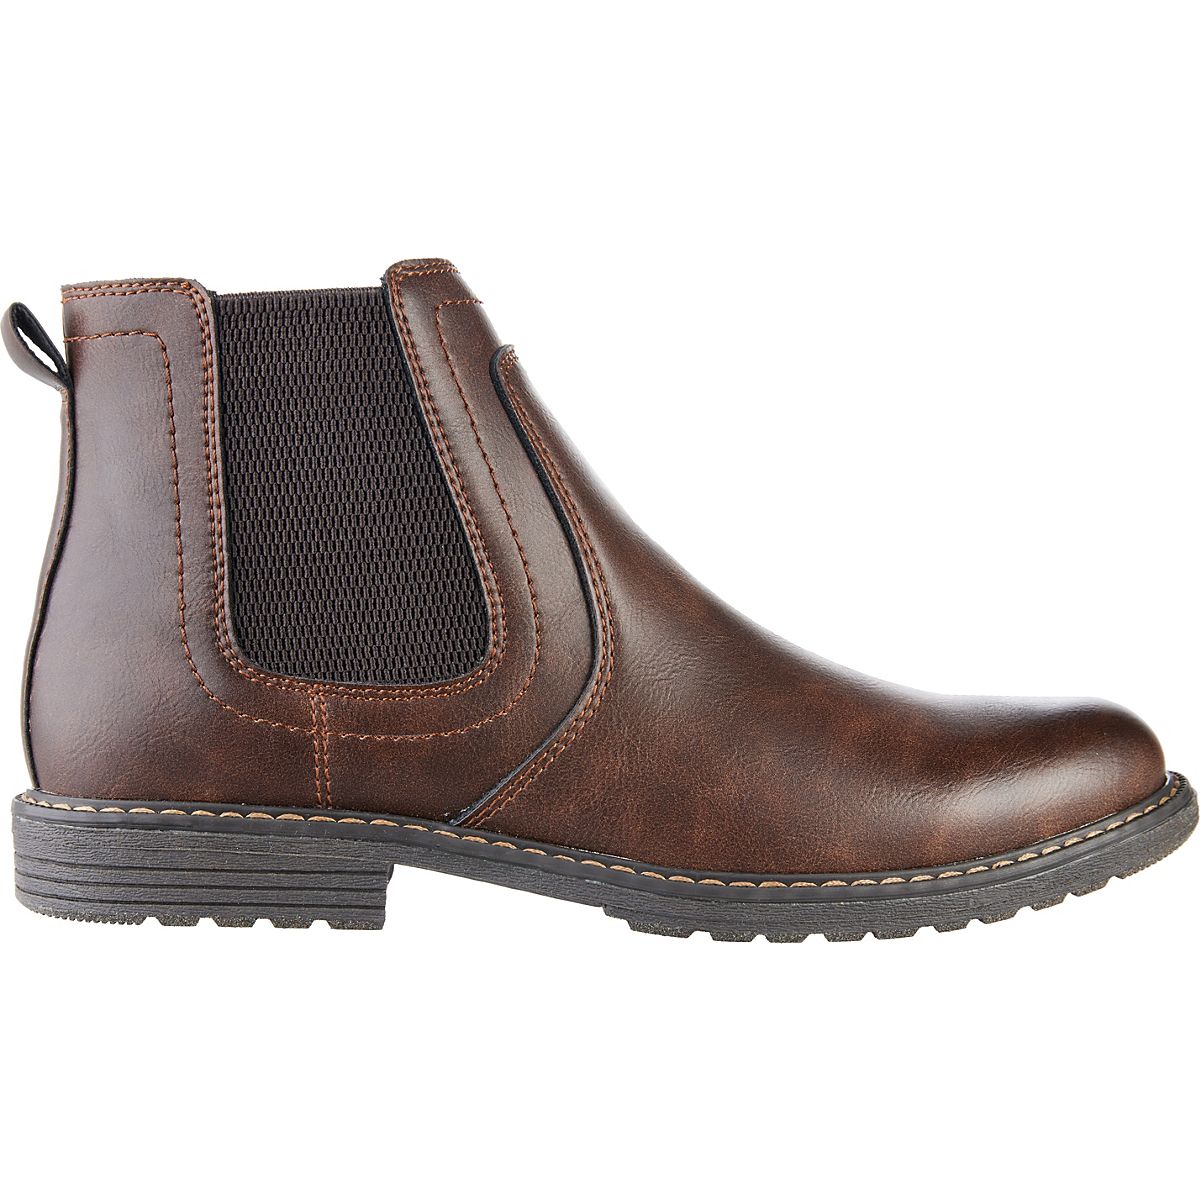 Magellan Outdoors Men’s Chelsea Boots | Free Shipping at Academy